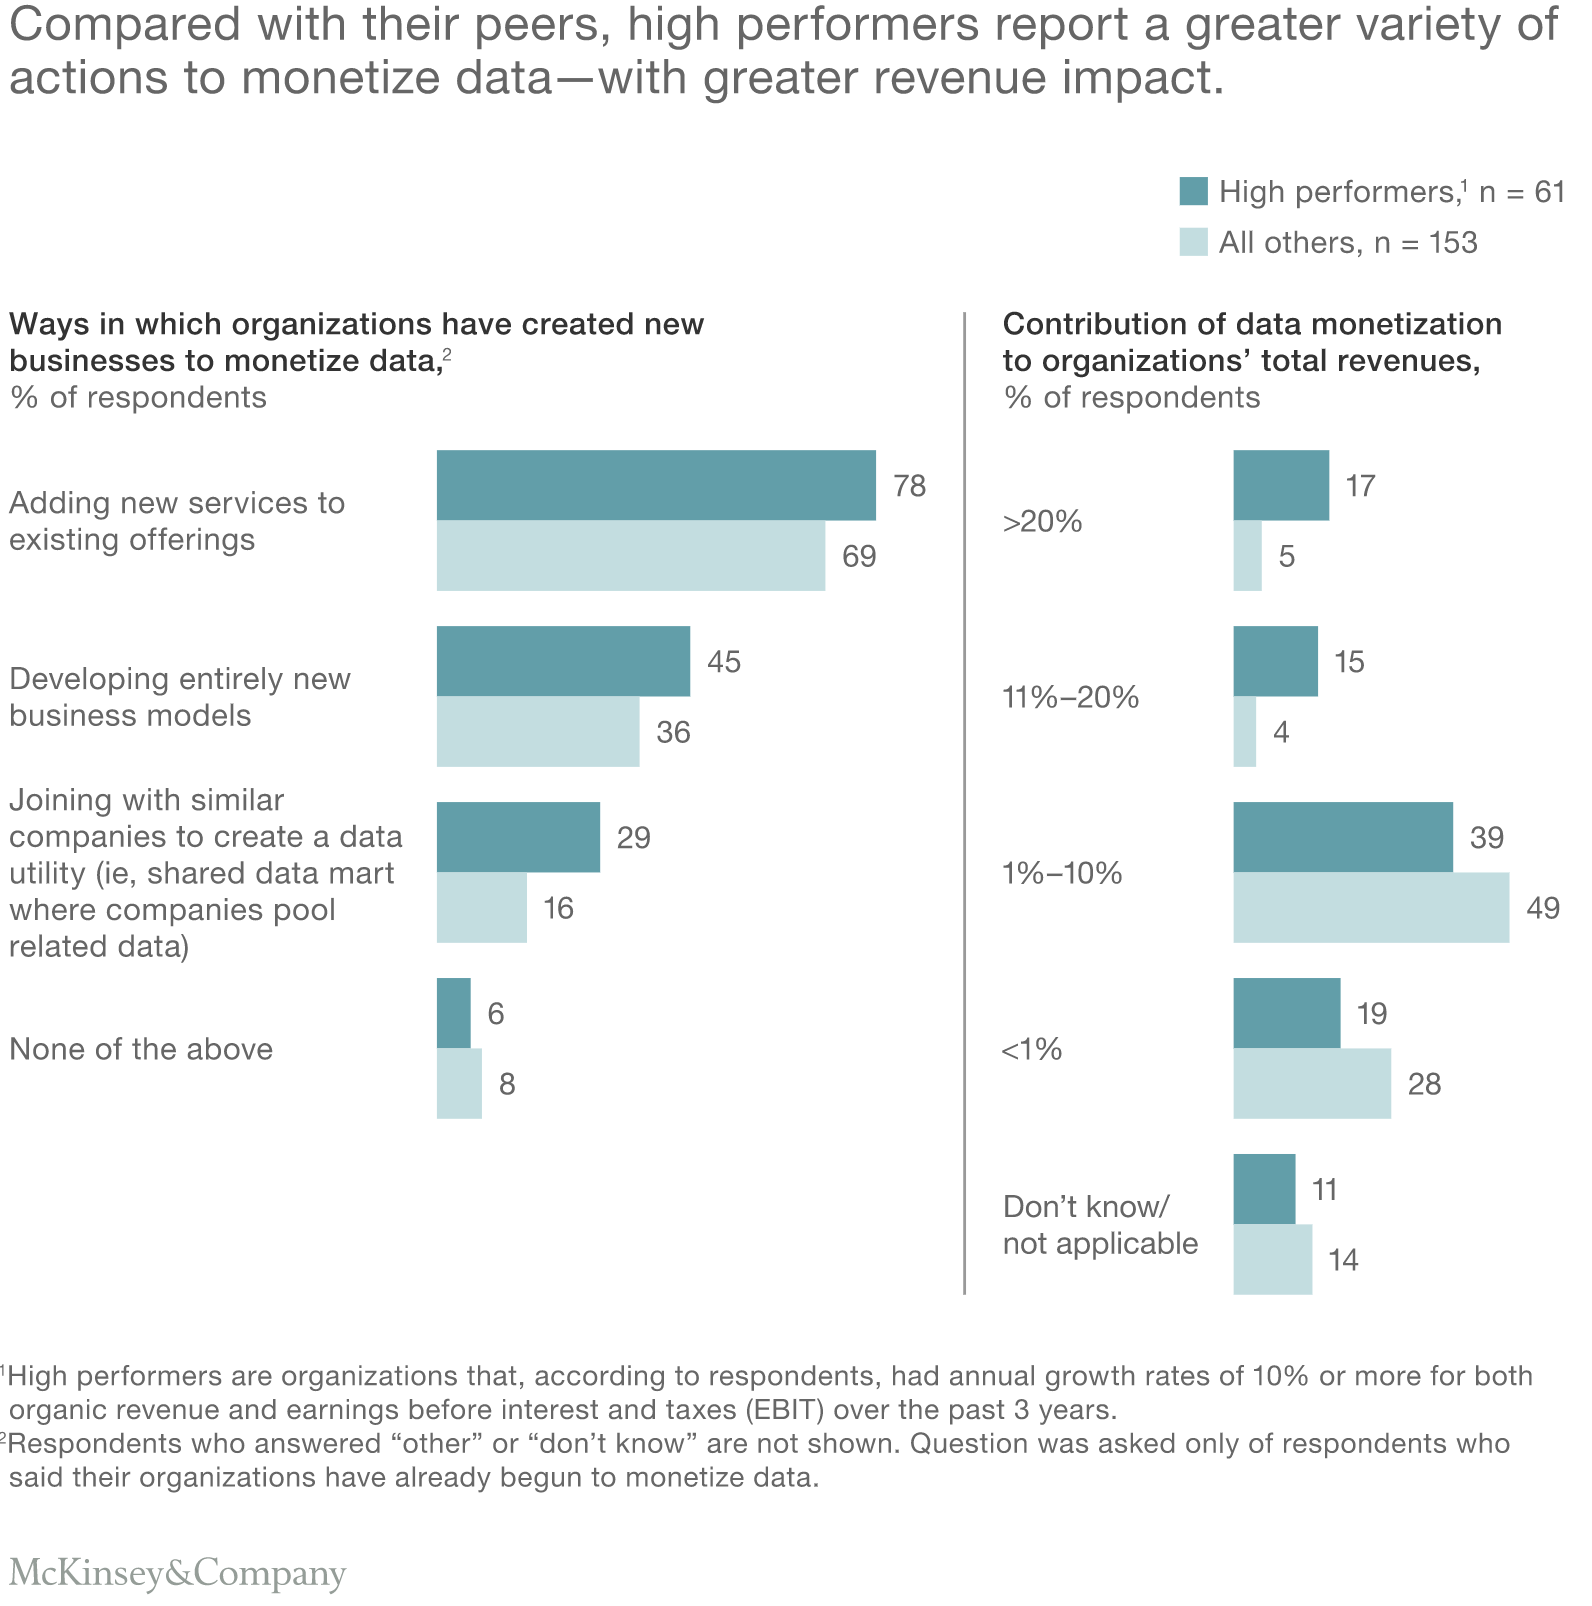 The Right Data Monetization Strategies Have a Positive Impact on Revenue